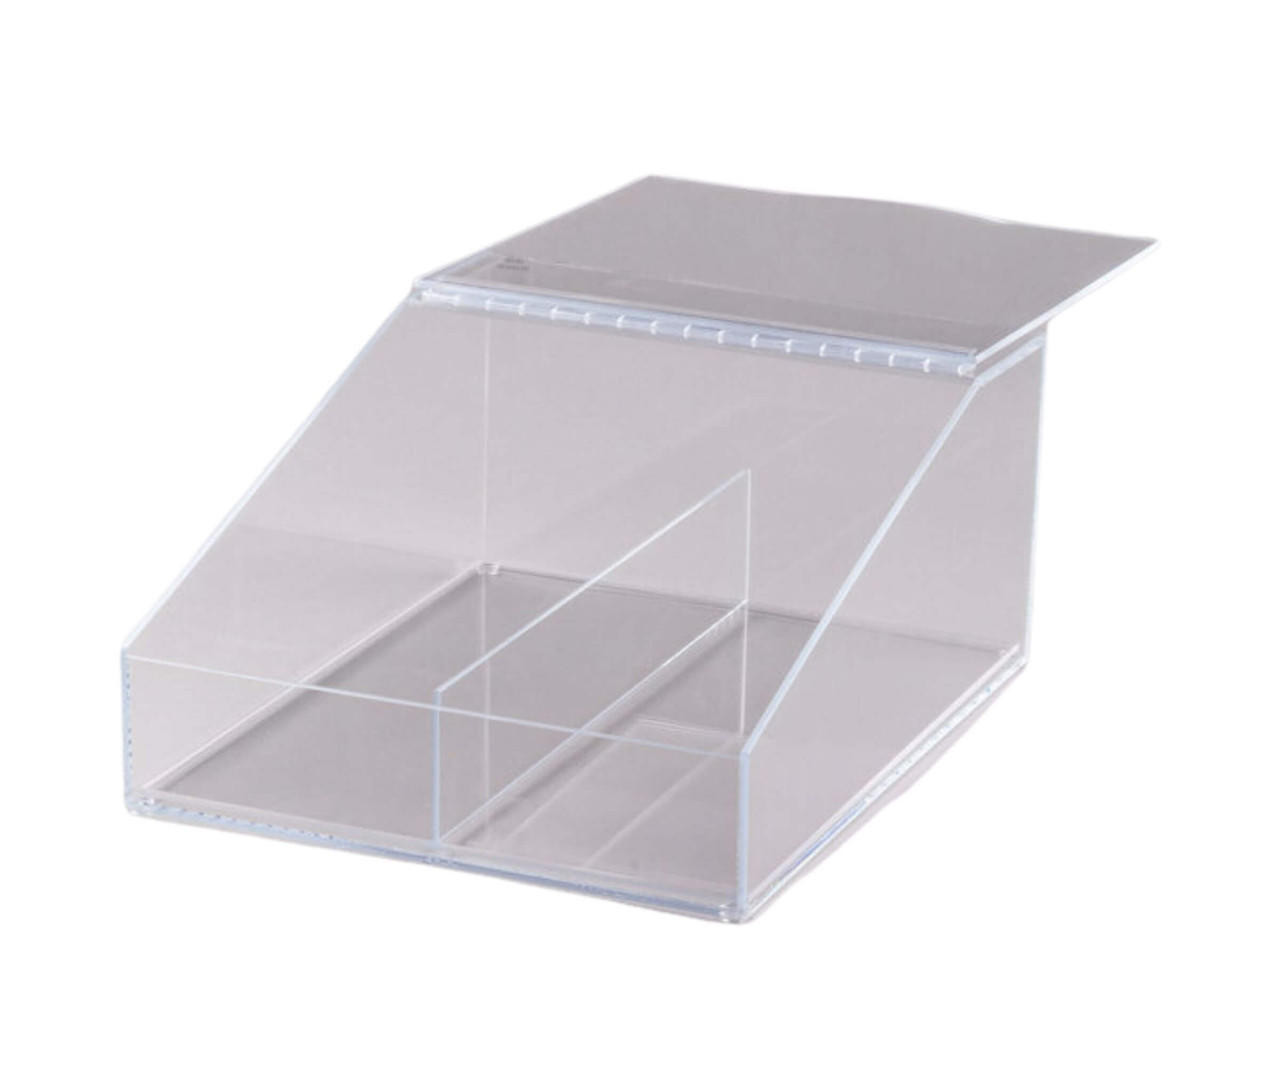  Cal-Mil 123 Classic Acrylic Food Bin with Removable Divider - 13" x 16" x 7" - Versatile Food Storage 